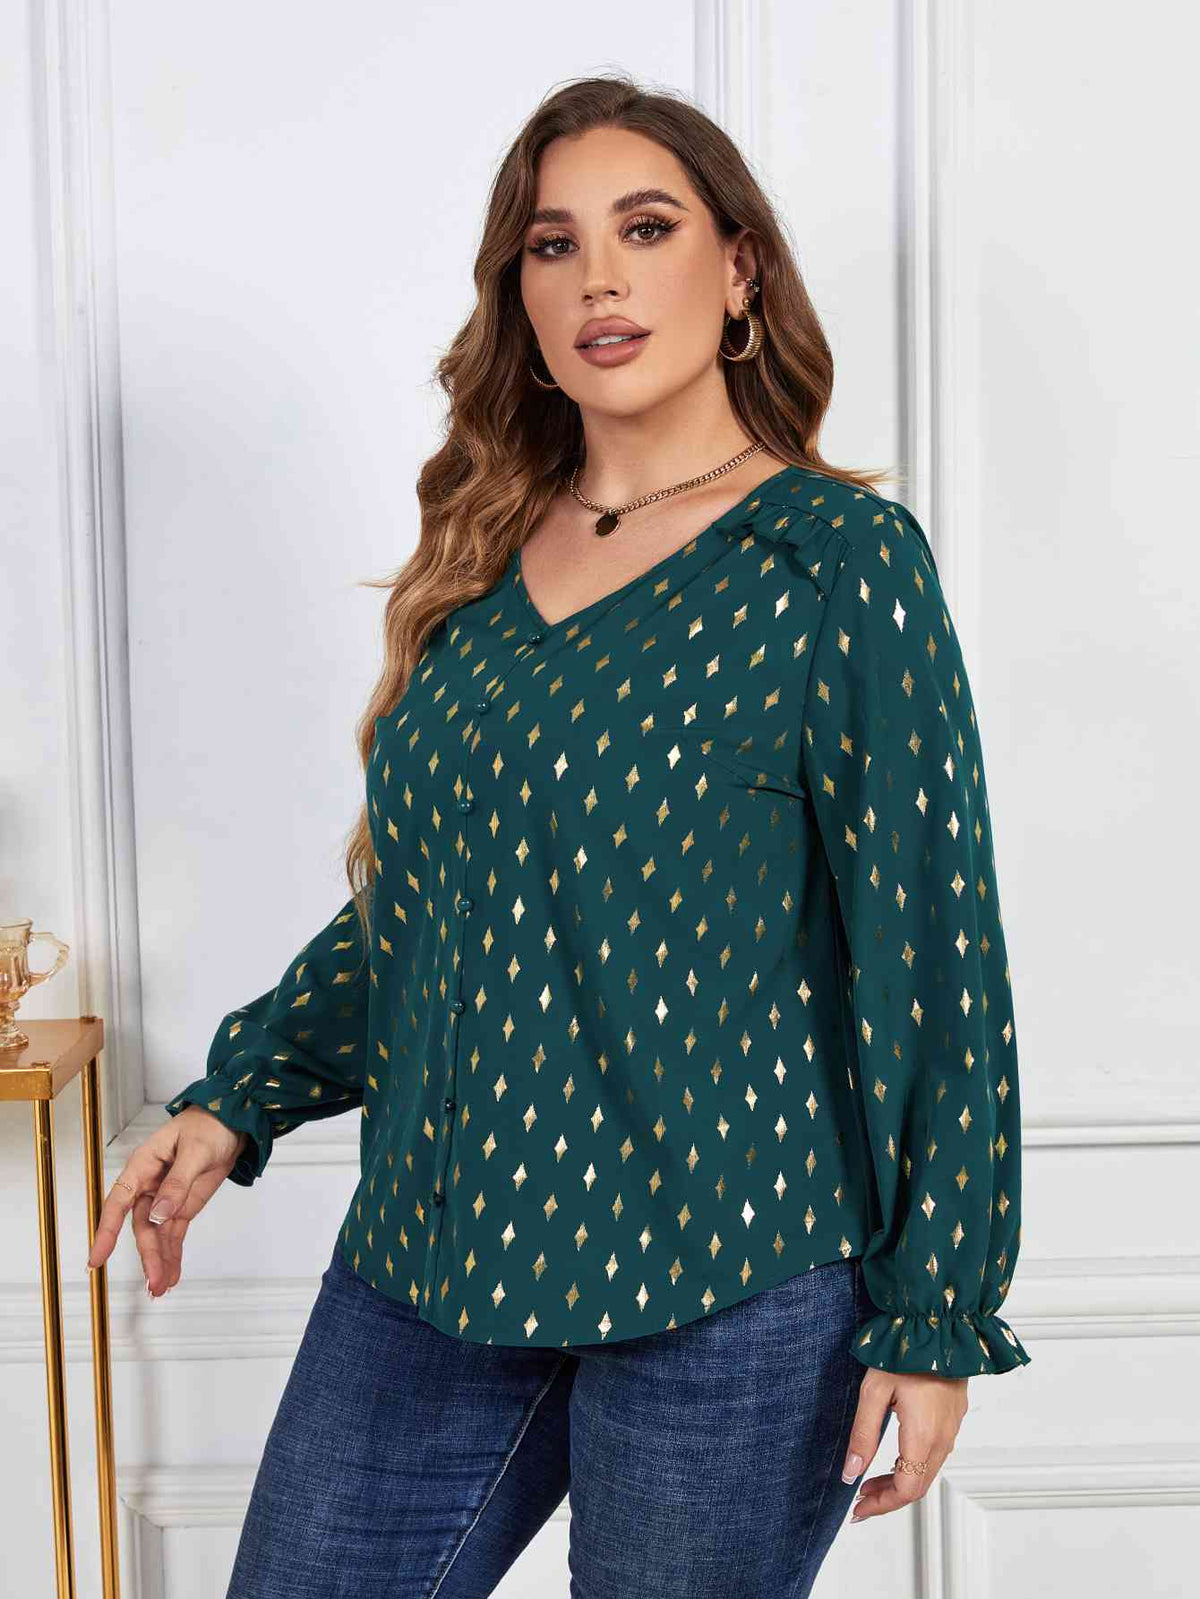 Melo Apparel Plus Size Printed Frill Trim Flounce Sleeve Blouse